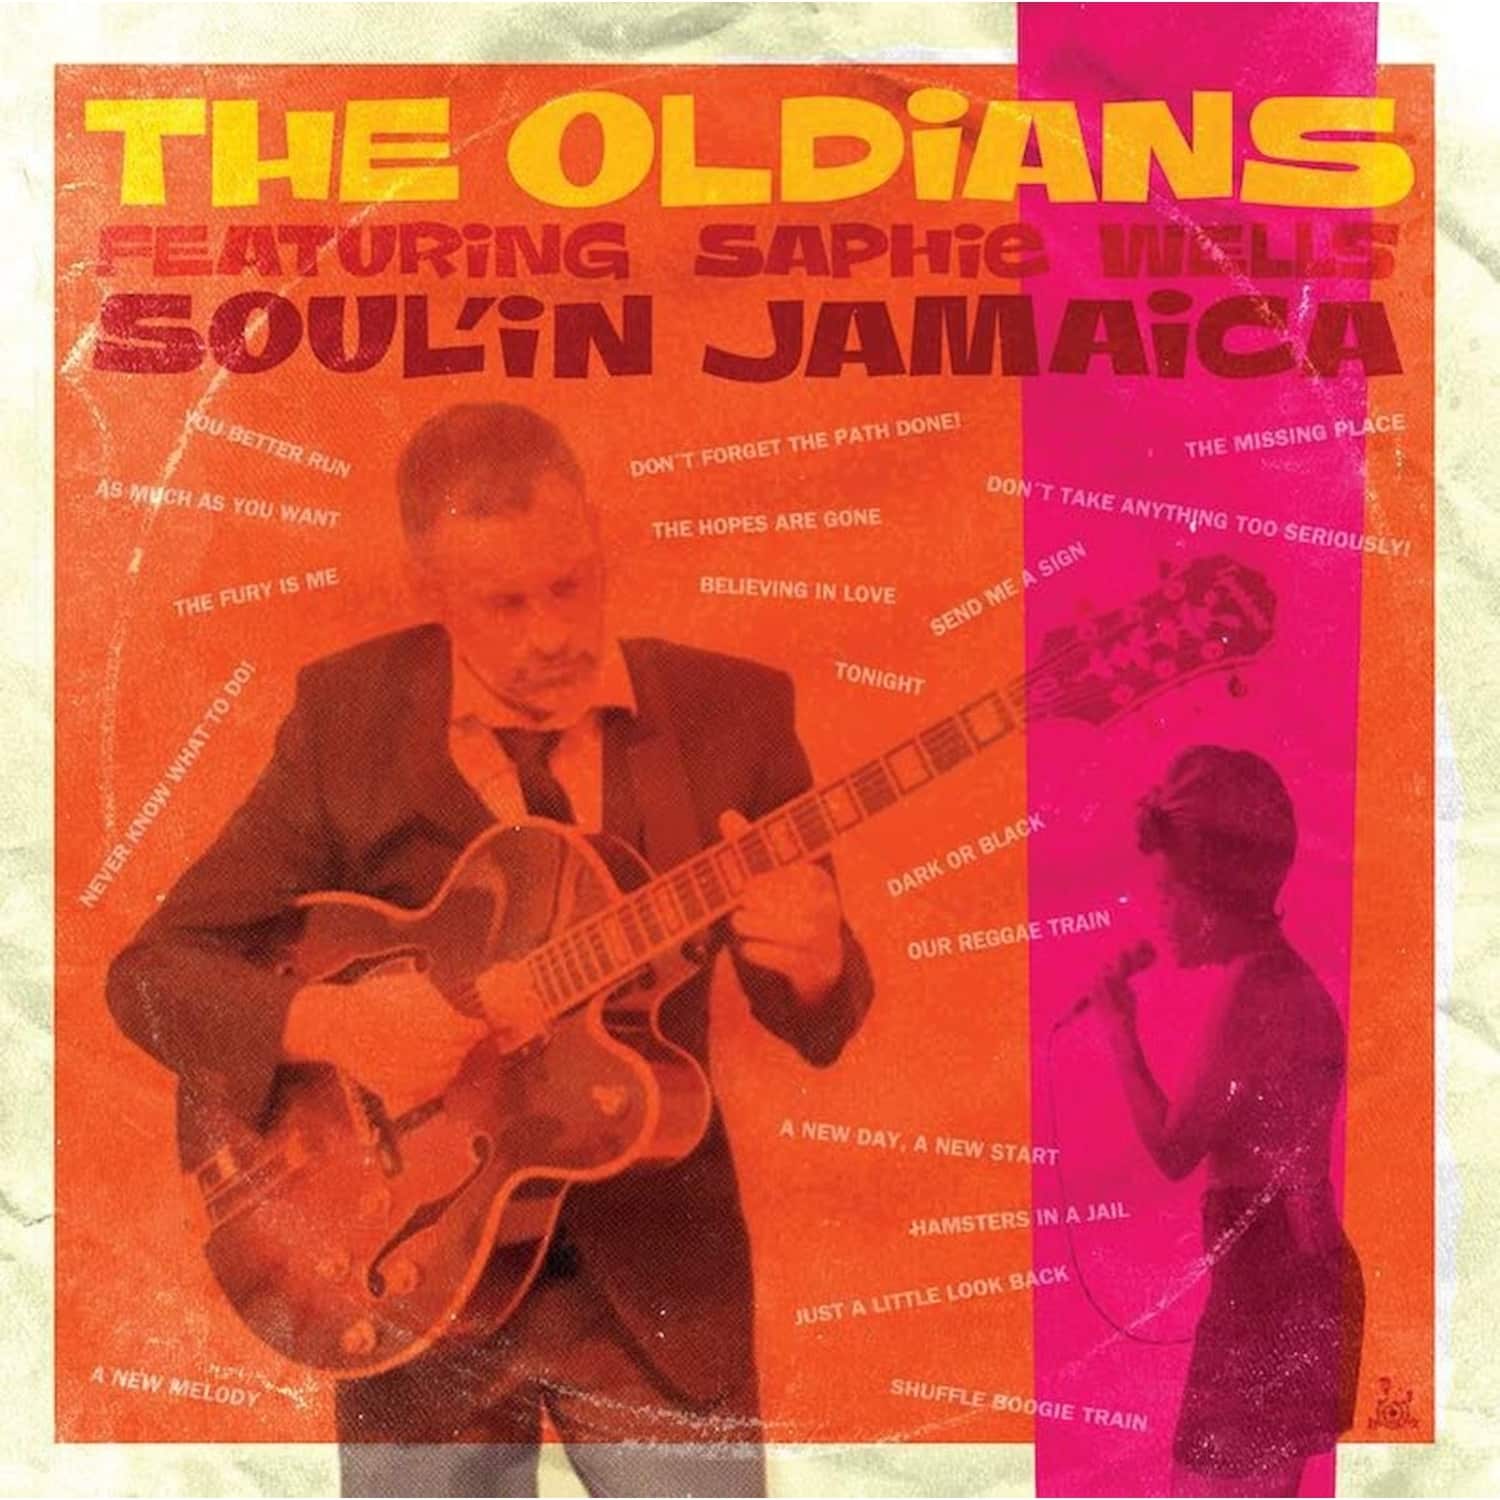 The Oldians - SOUL IN JAMAICA 